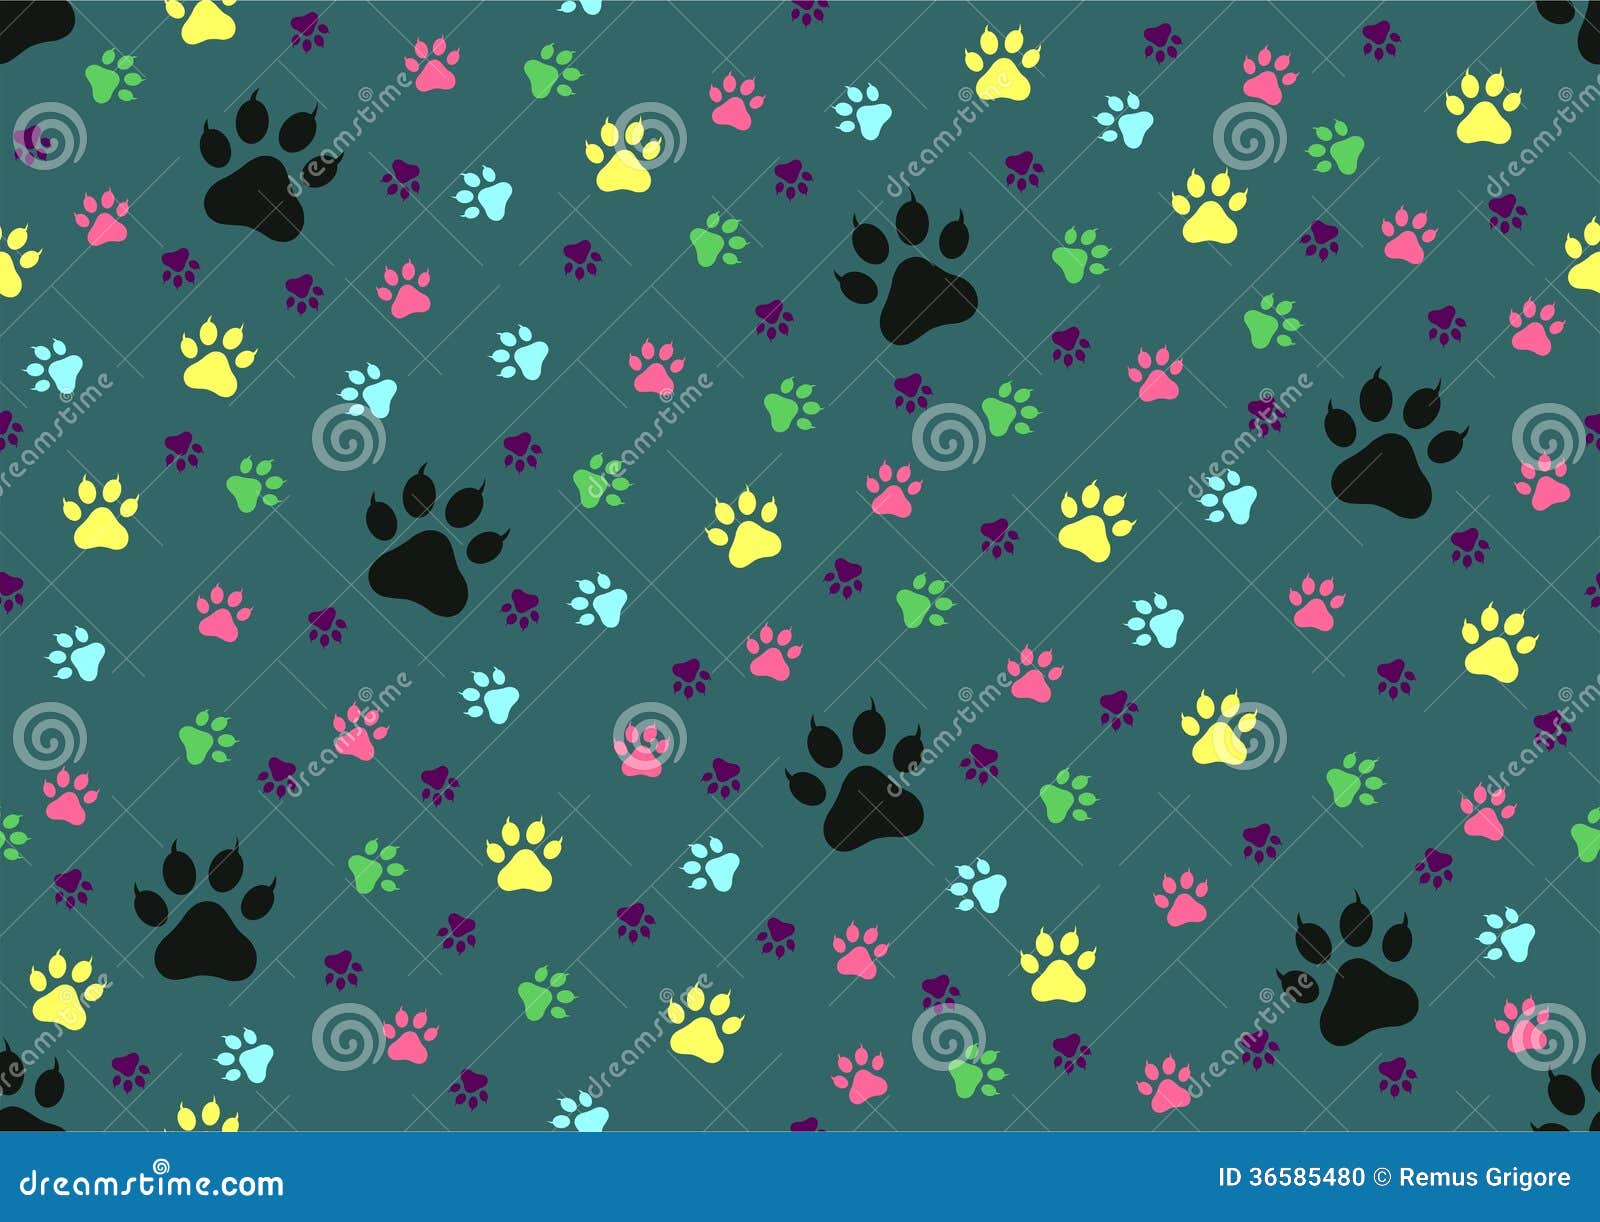 Cat Paw Prints Seamless Background - Cdr Format Stock Vector